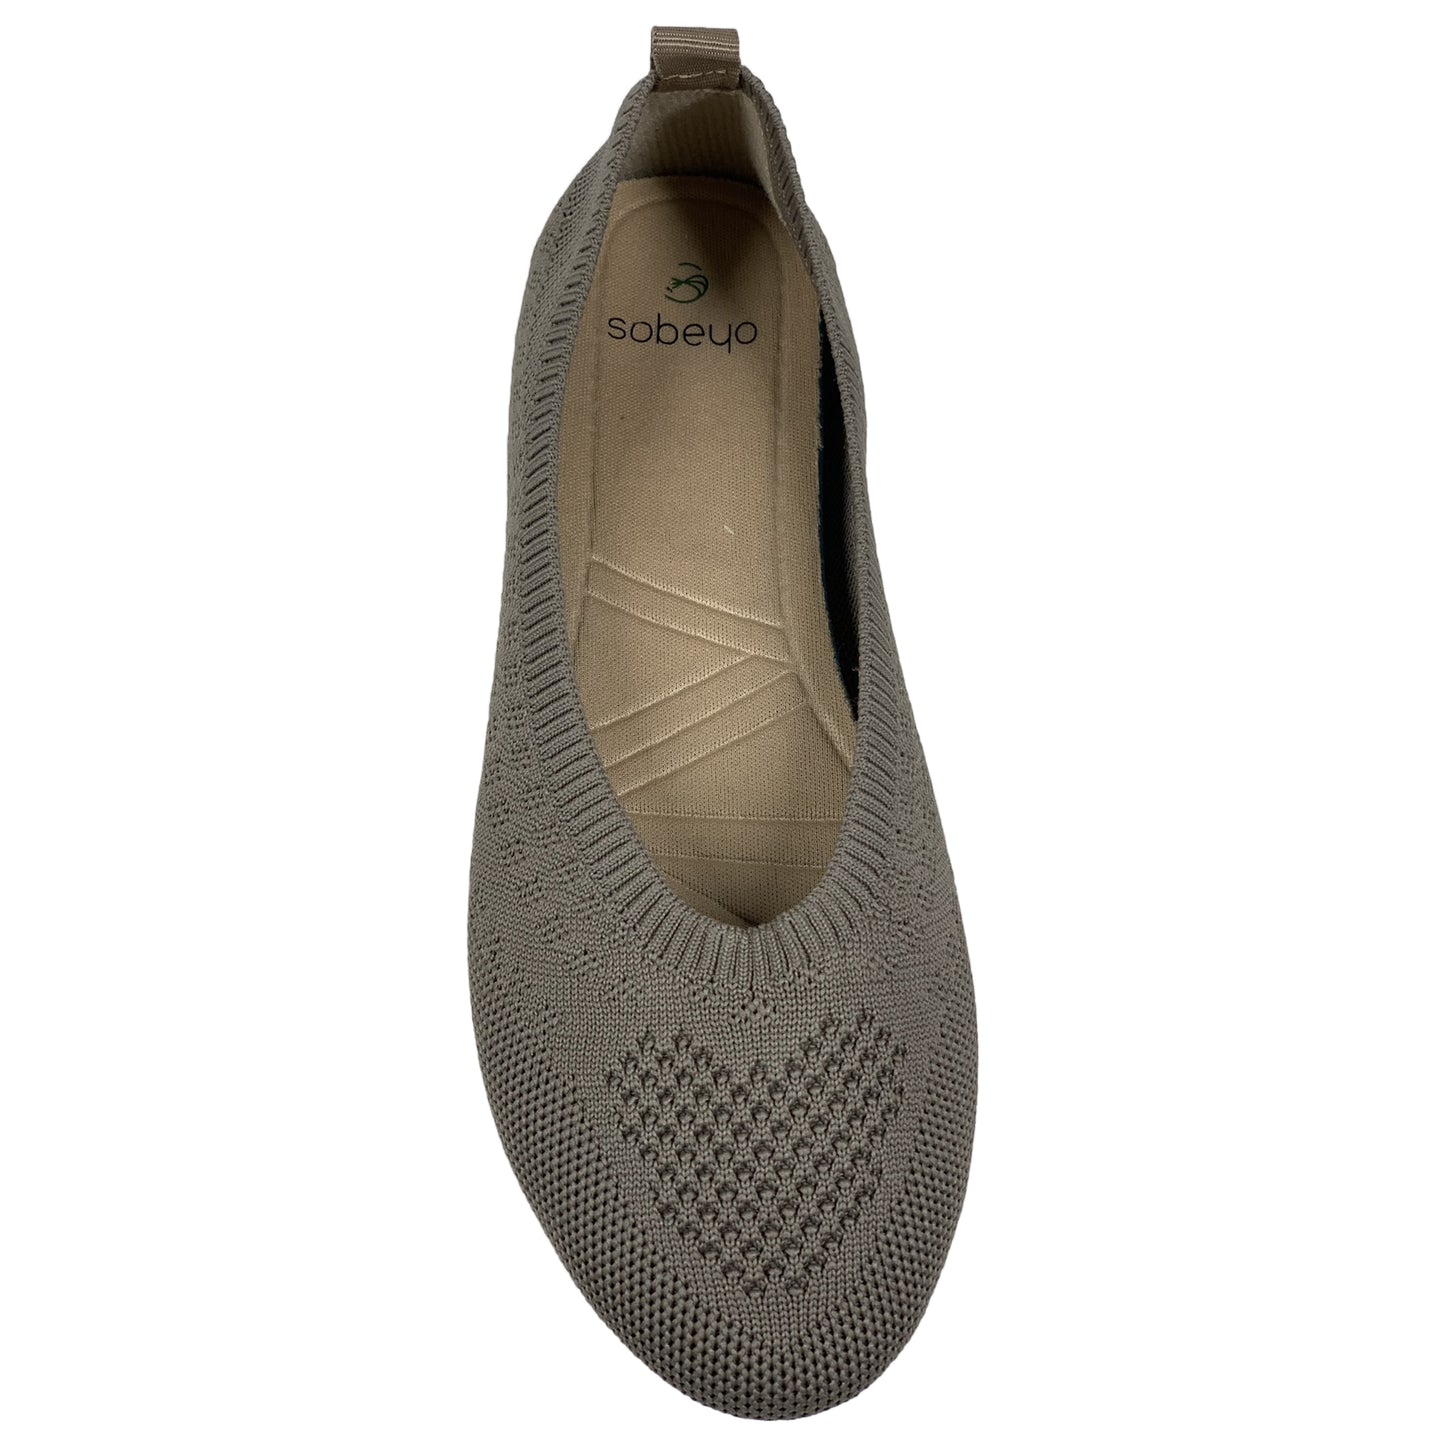 SOBEYO Sweater Round Toe Ballet Flats Soft Foldable Sole Taupe